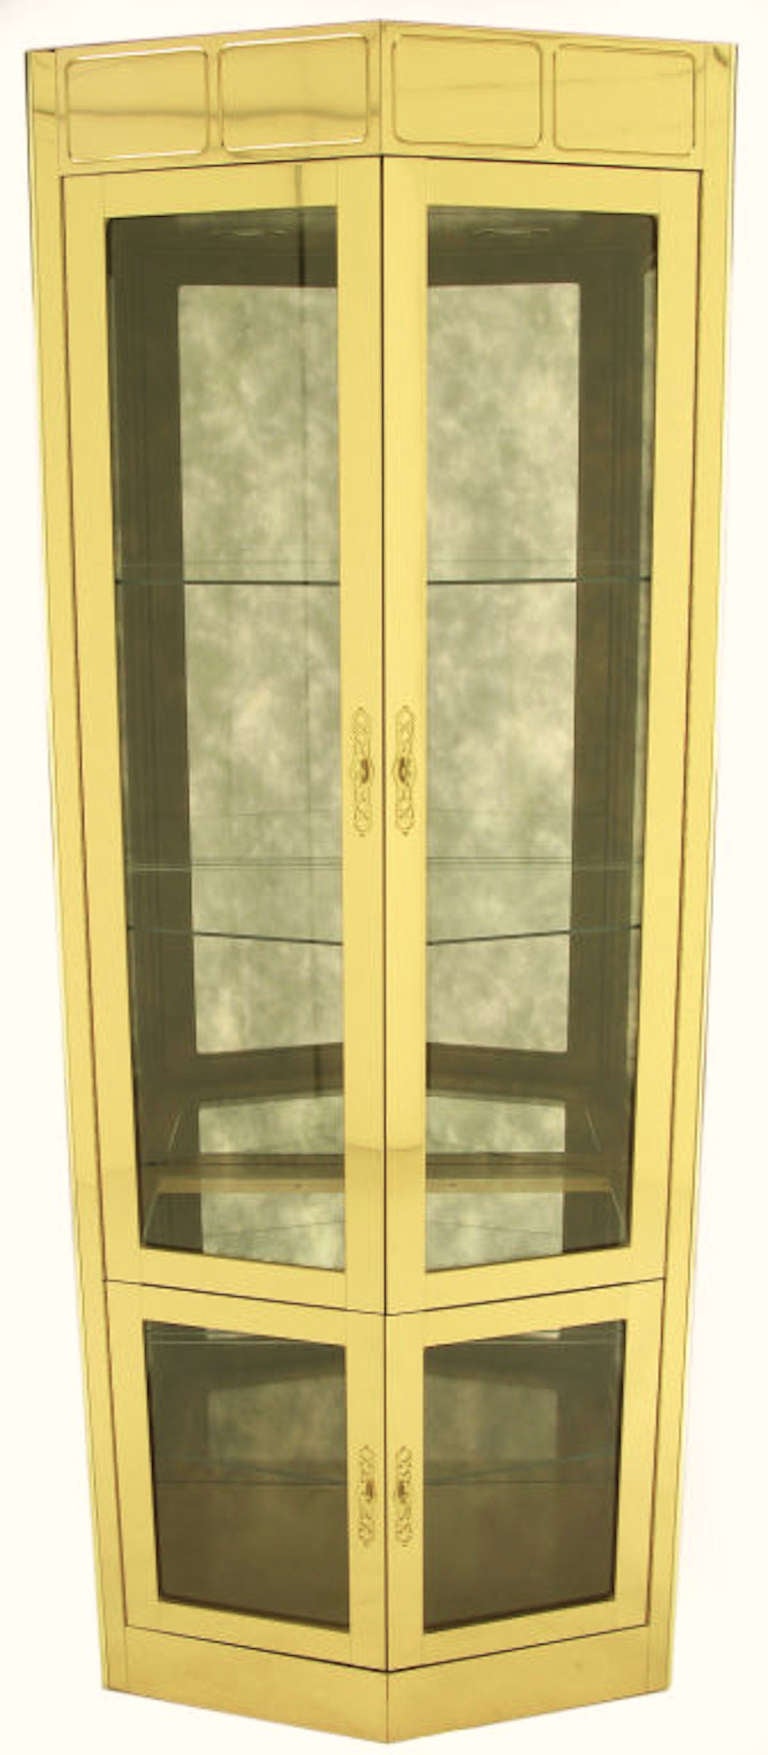 Pair of Mastercraft pentagonal brass over wood four door vitrines. Taller top compartment has two glass shelves. Lower compartment has a single glass shelf. Tops are illuminated with two incandescent recessed lights and a dimmer switch. Pierced